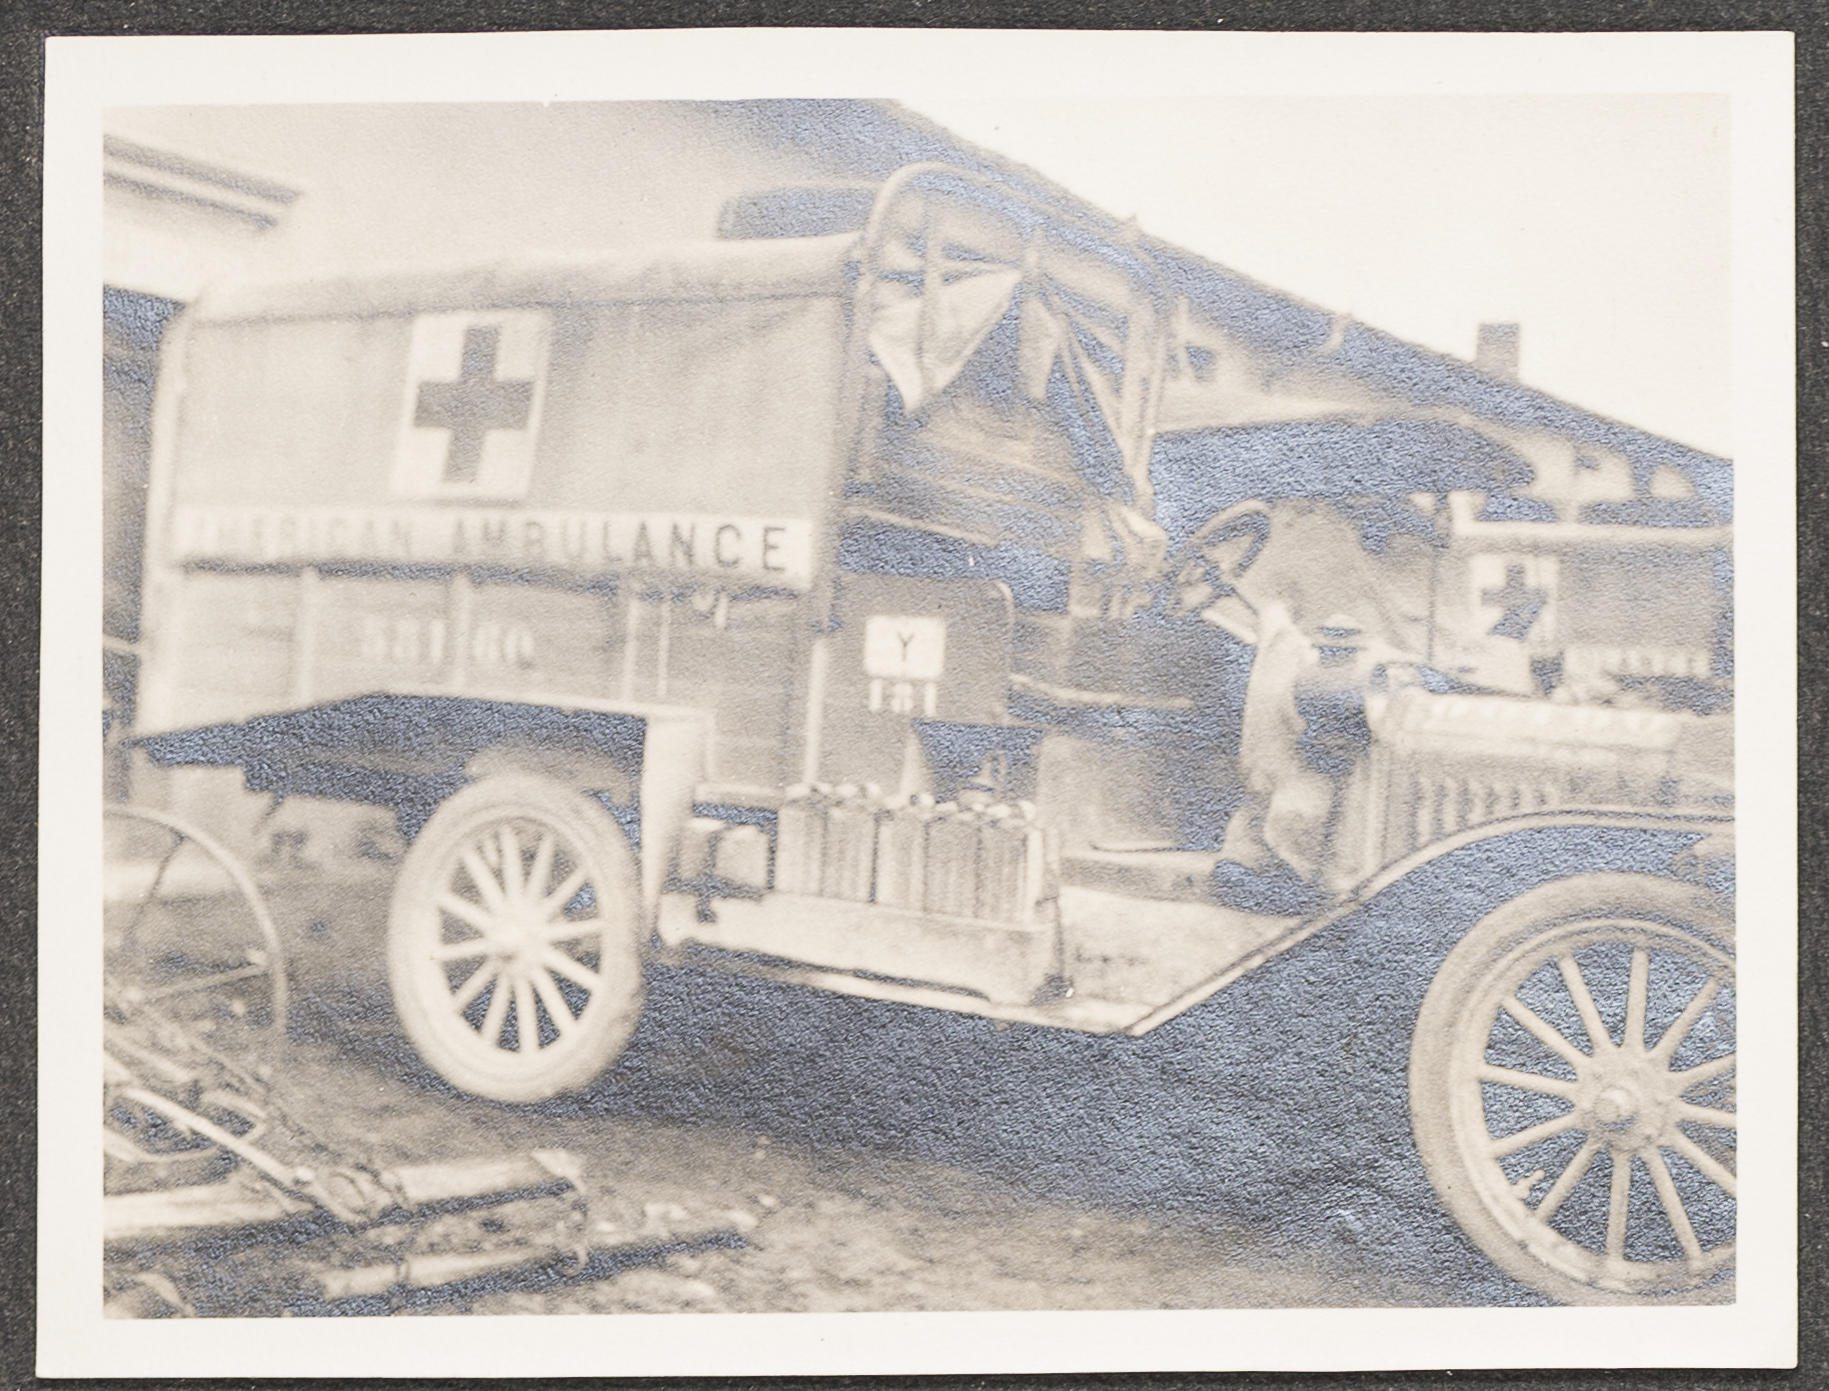 An ambulance in France during WWI.